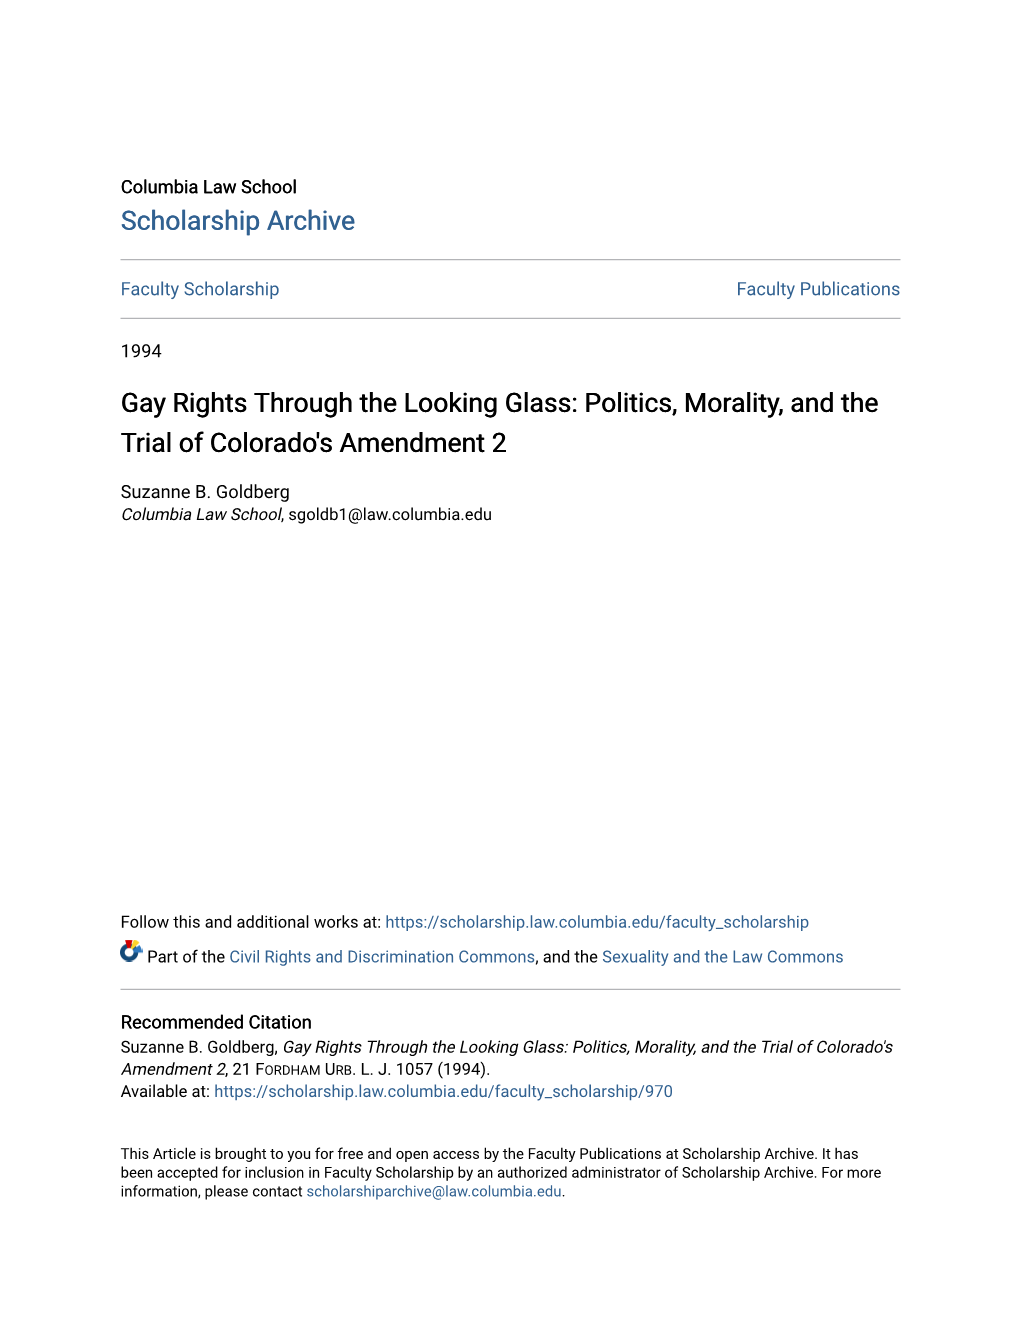 Gay Rights Through the Looking Glass: Politics, Morality, and the Trial of Colorado's Amendment 2